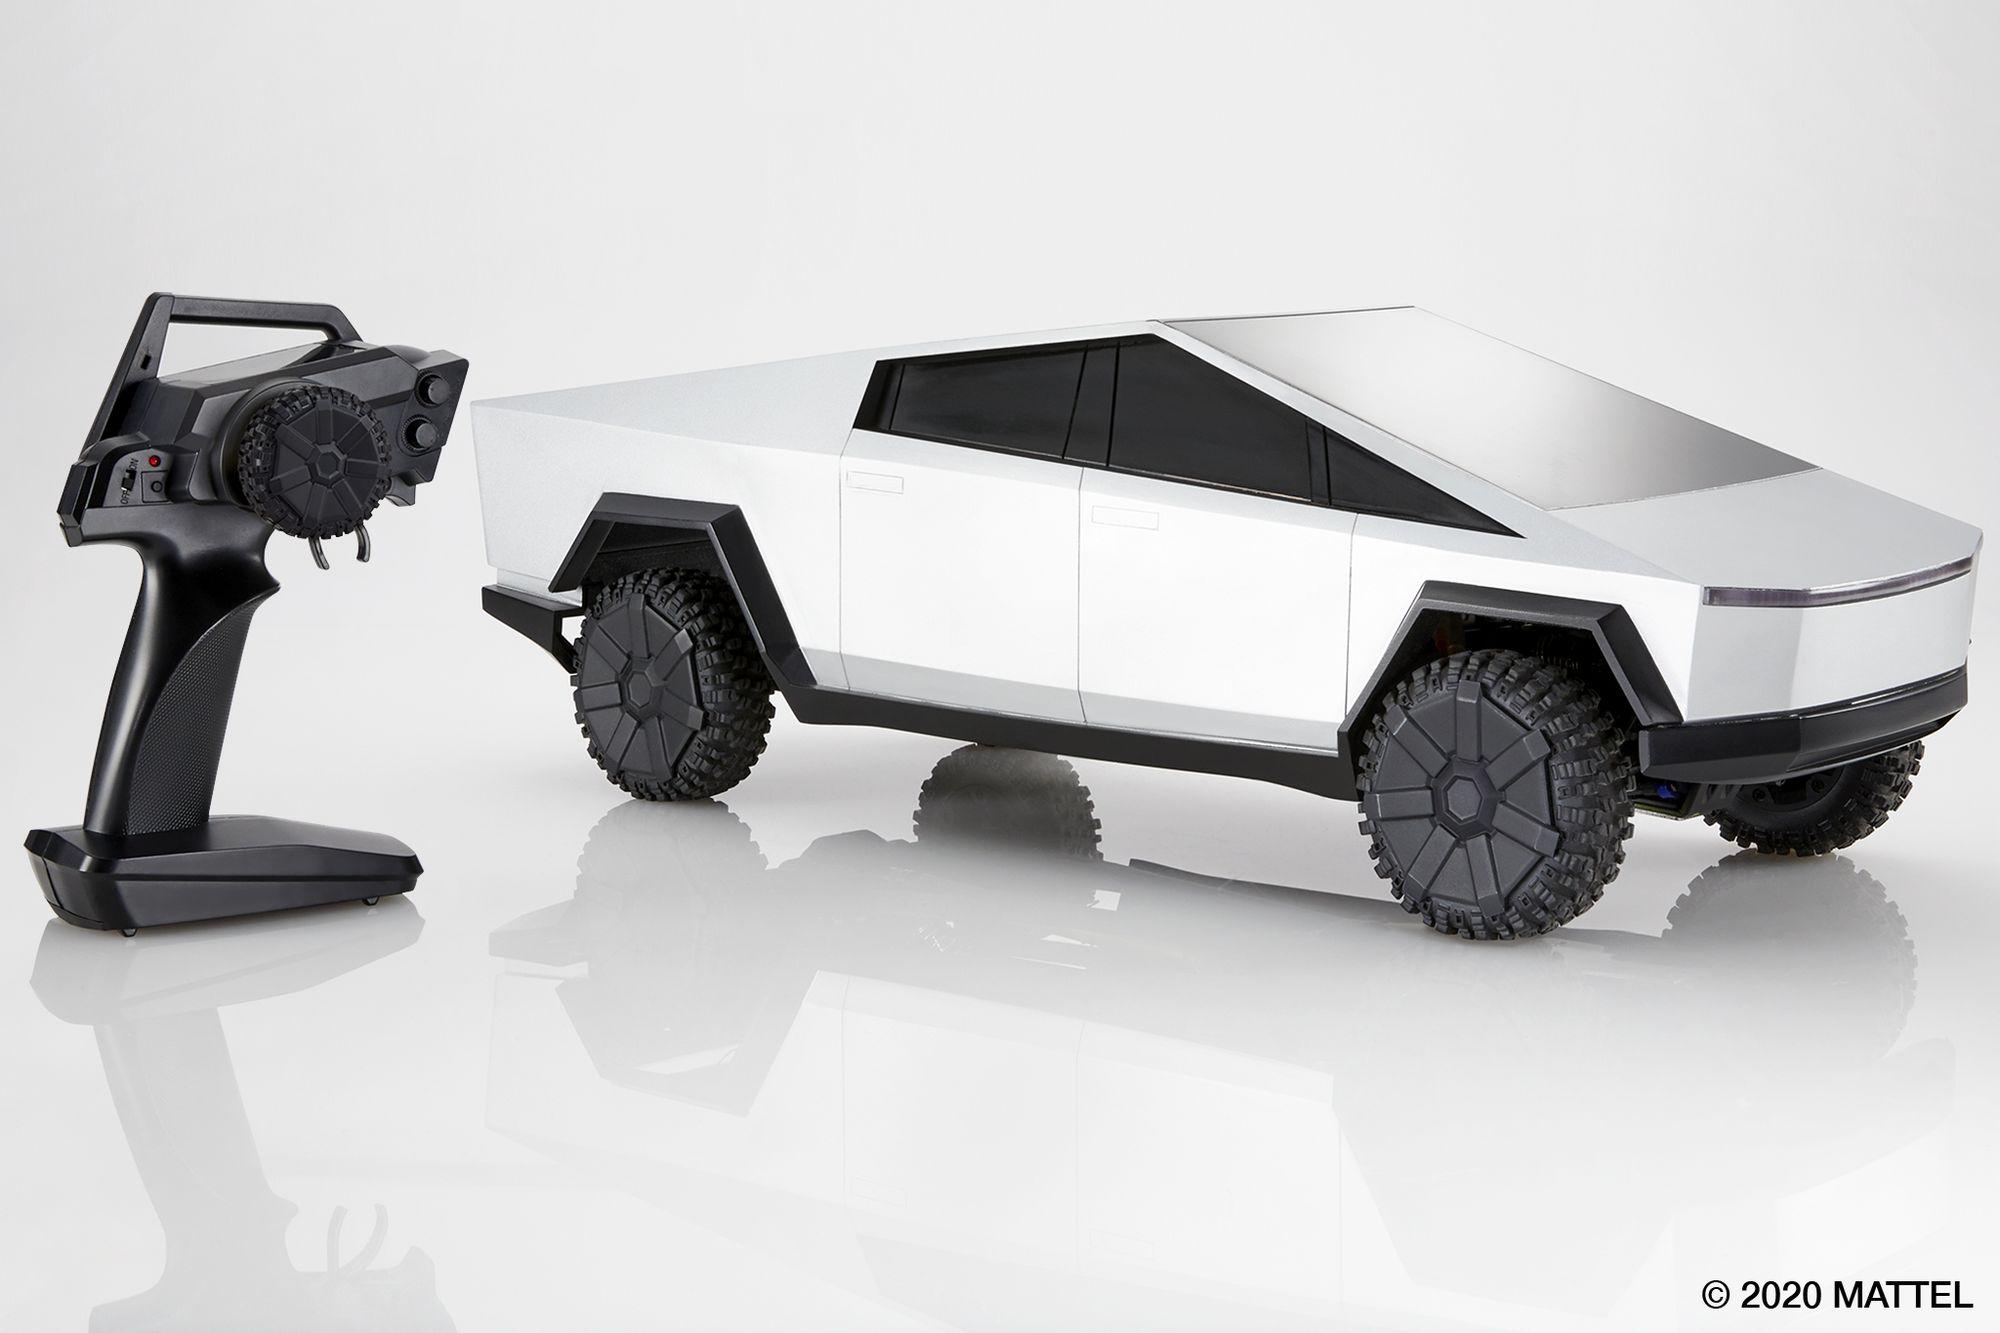 Remote Control Car Tesla: The Future of Remote Control Cars Is Here: Tesla Leads the Way